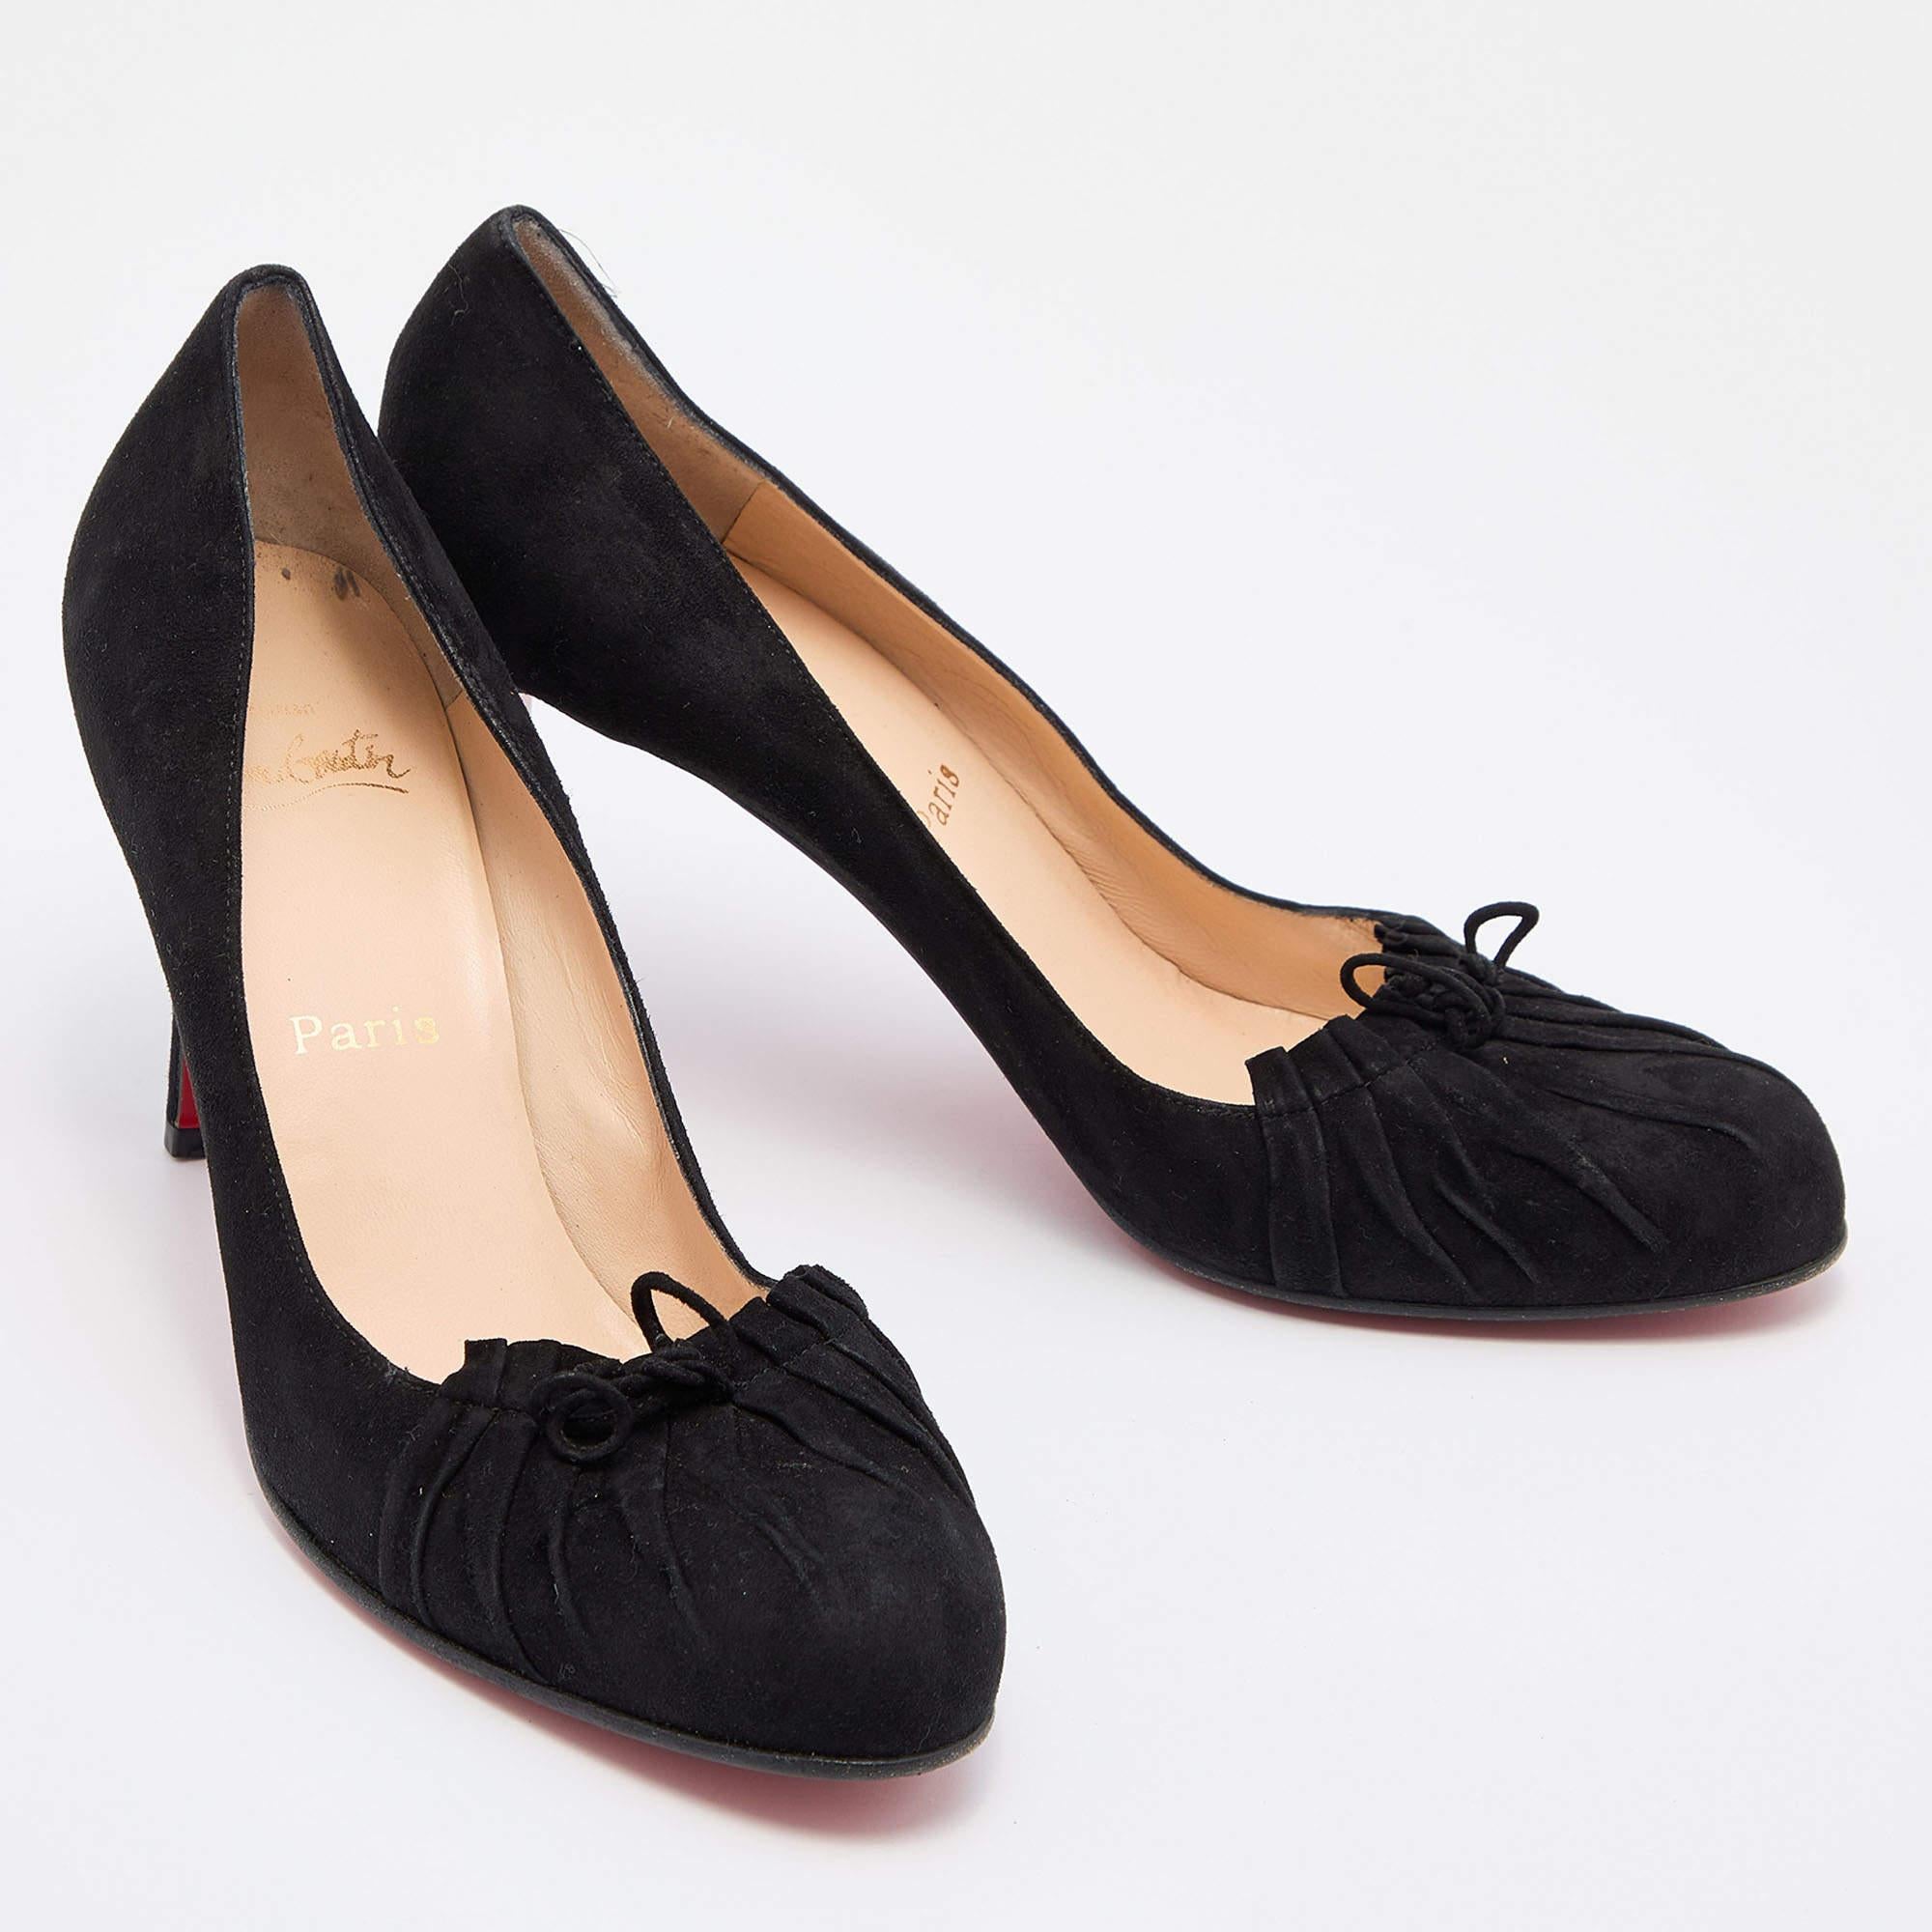 Christian Louboutin Black Suede Bow Round Toe Pumps Size 41.5 1